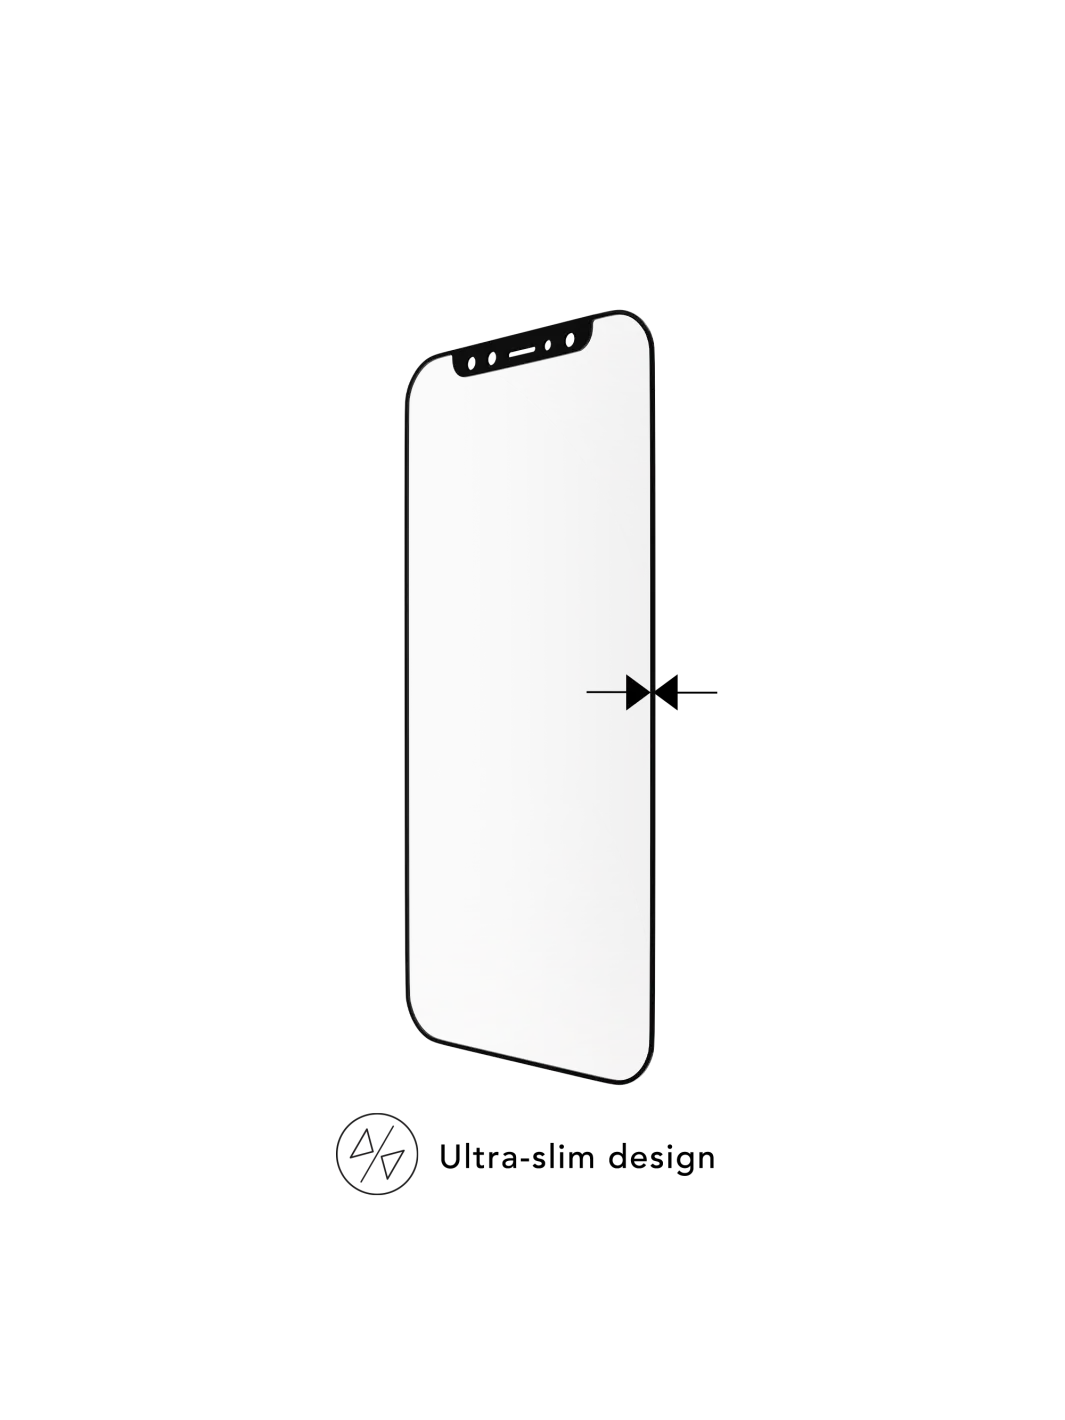 eco-shield - Phones iPhone 11/XR Phone Cases